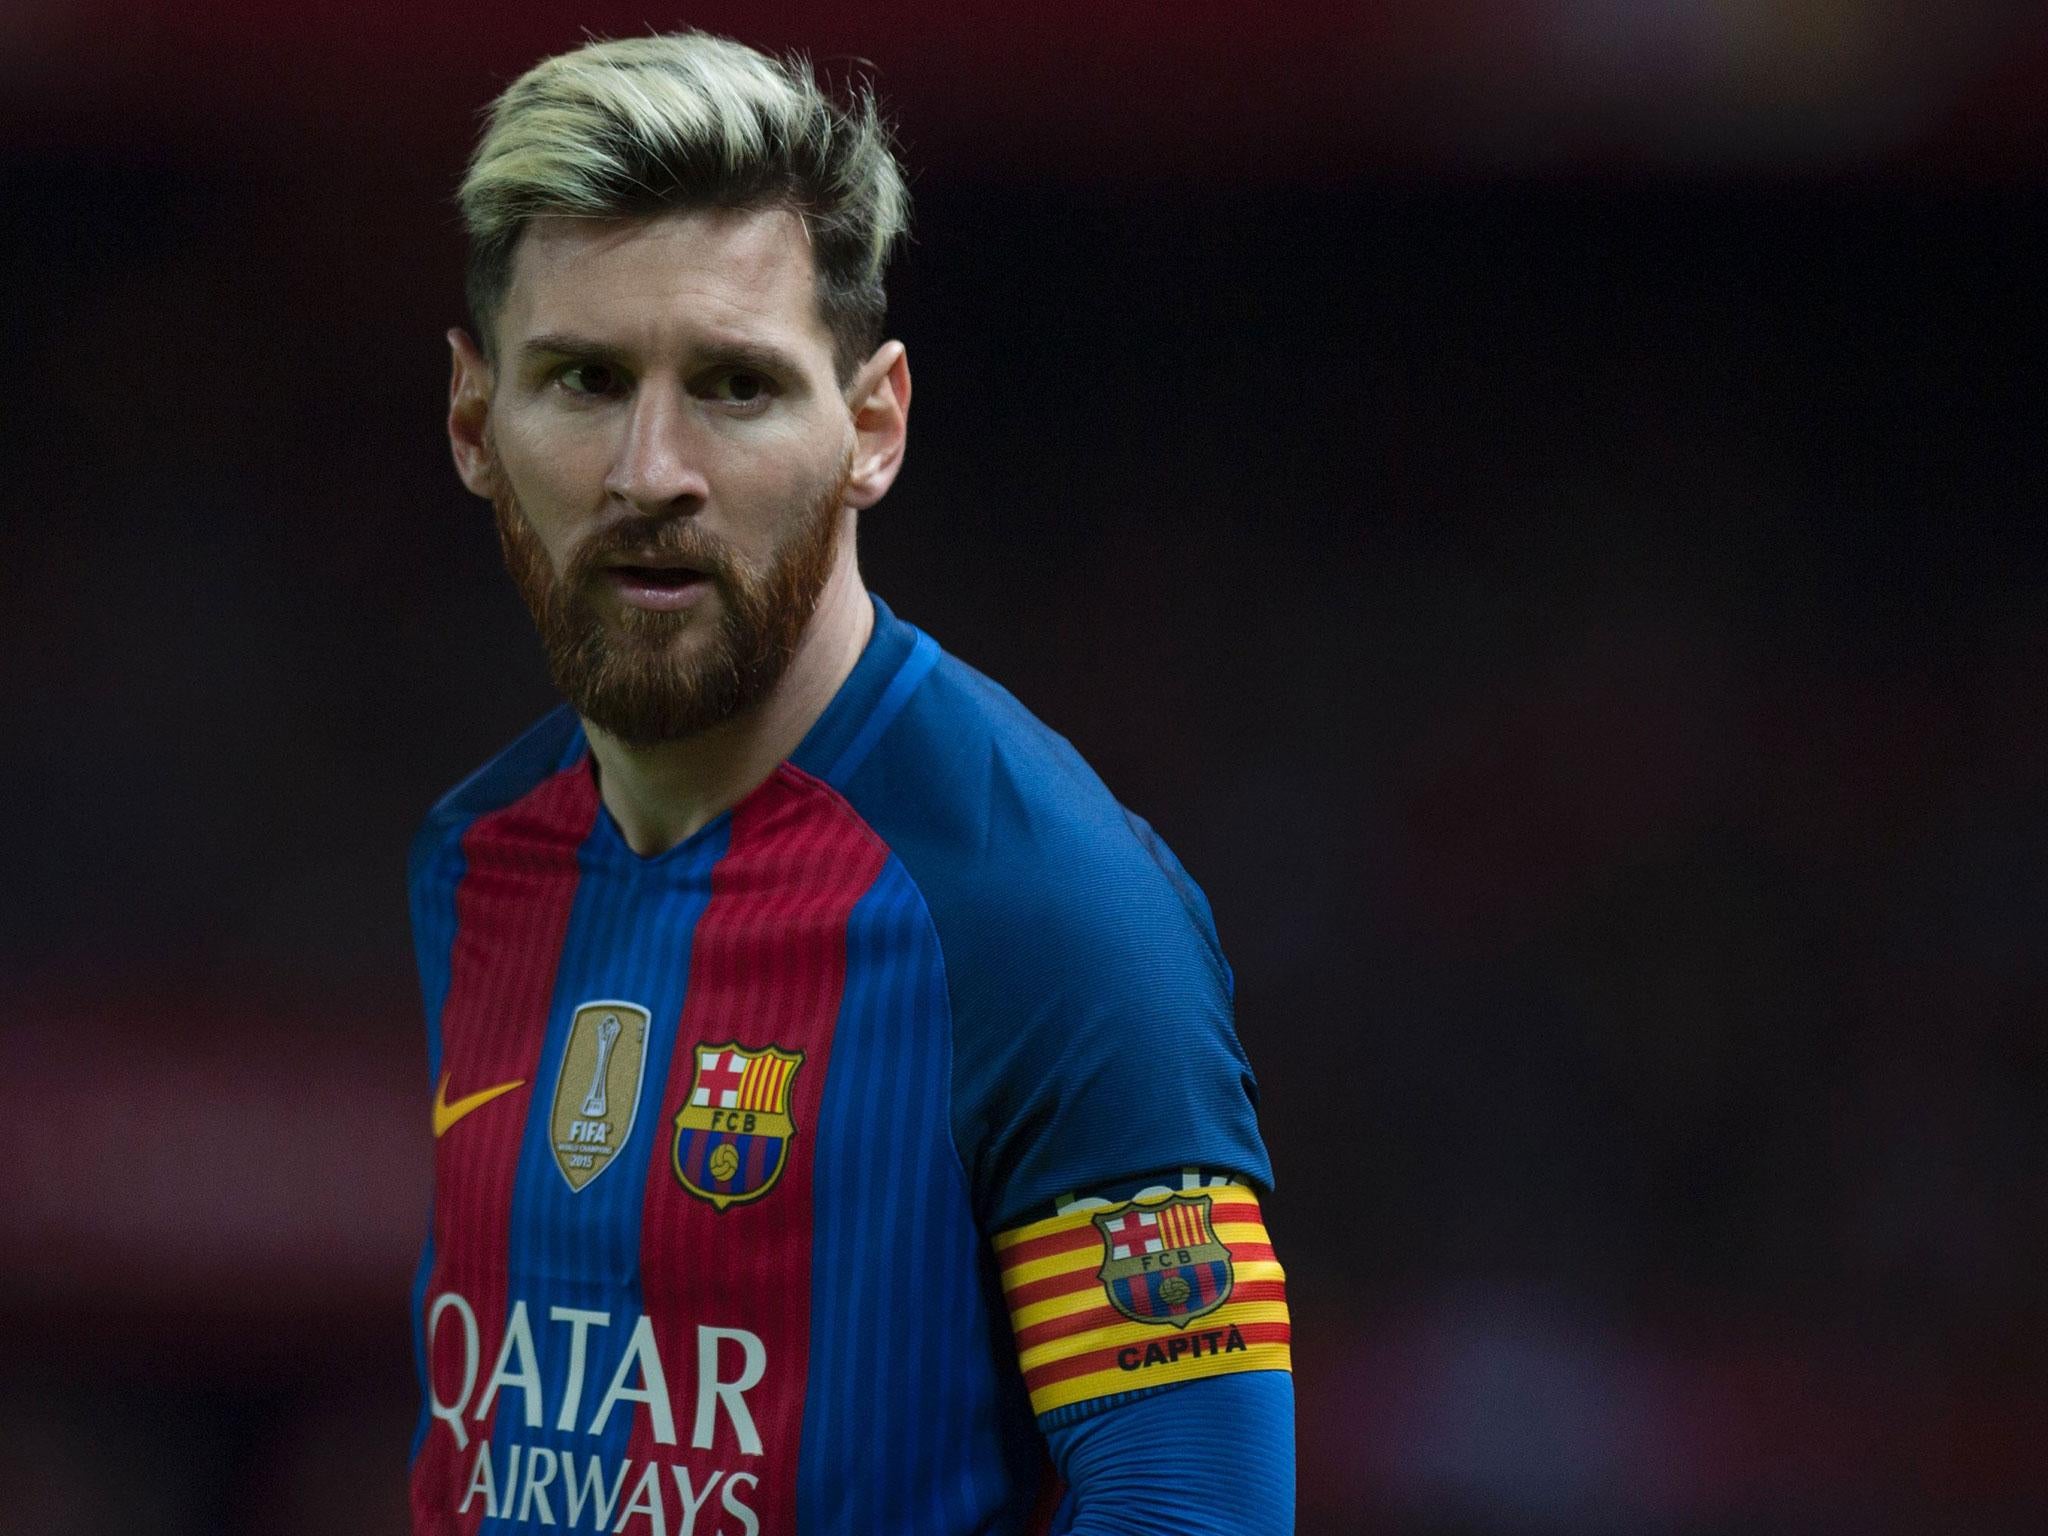 Lionel Messi was given a 21-month suspended prison sentence